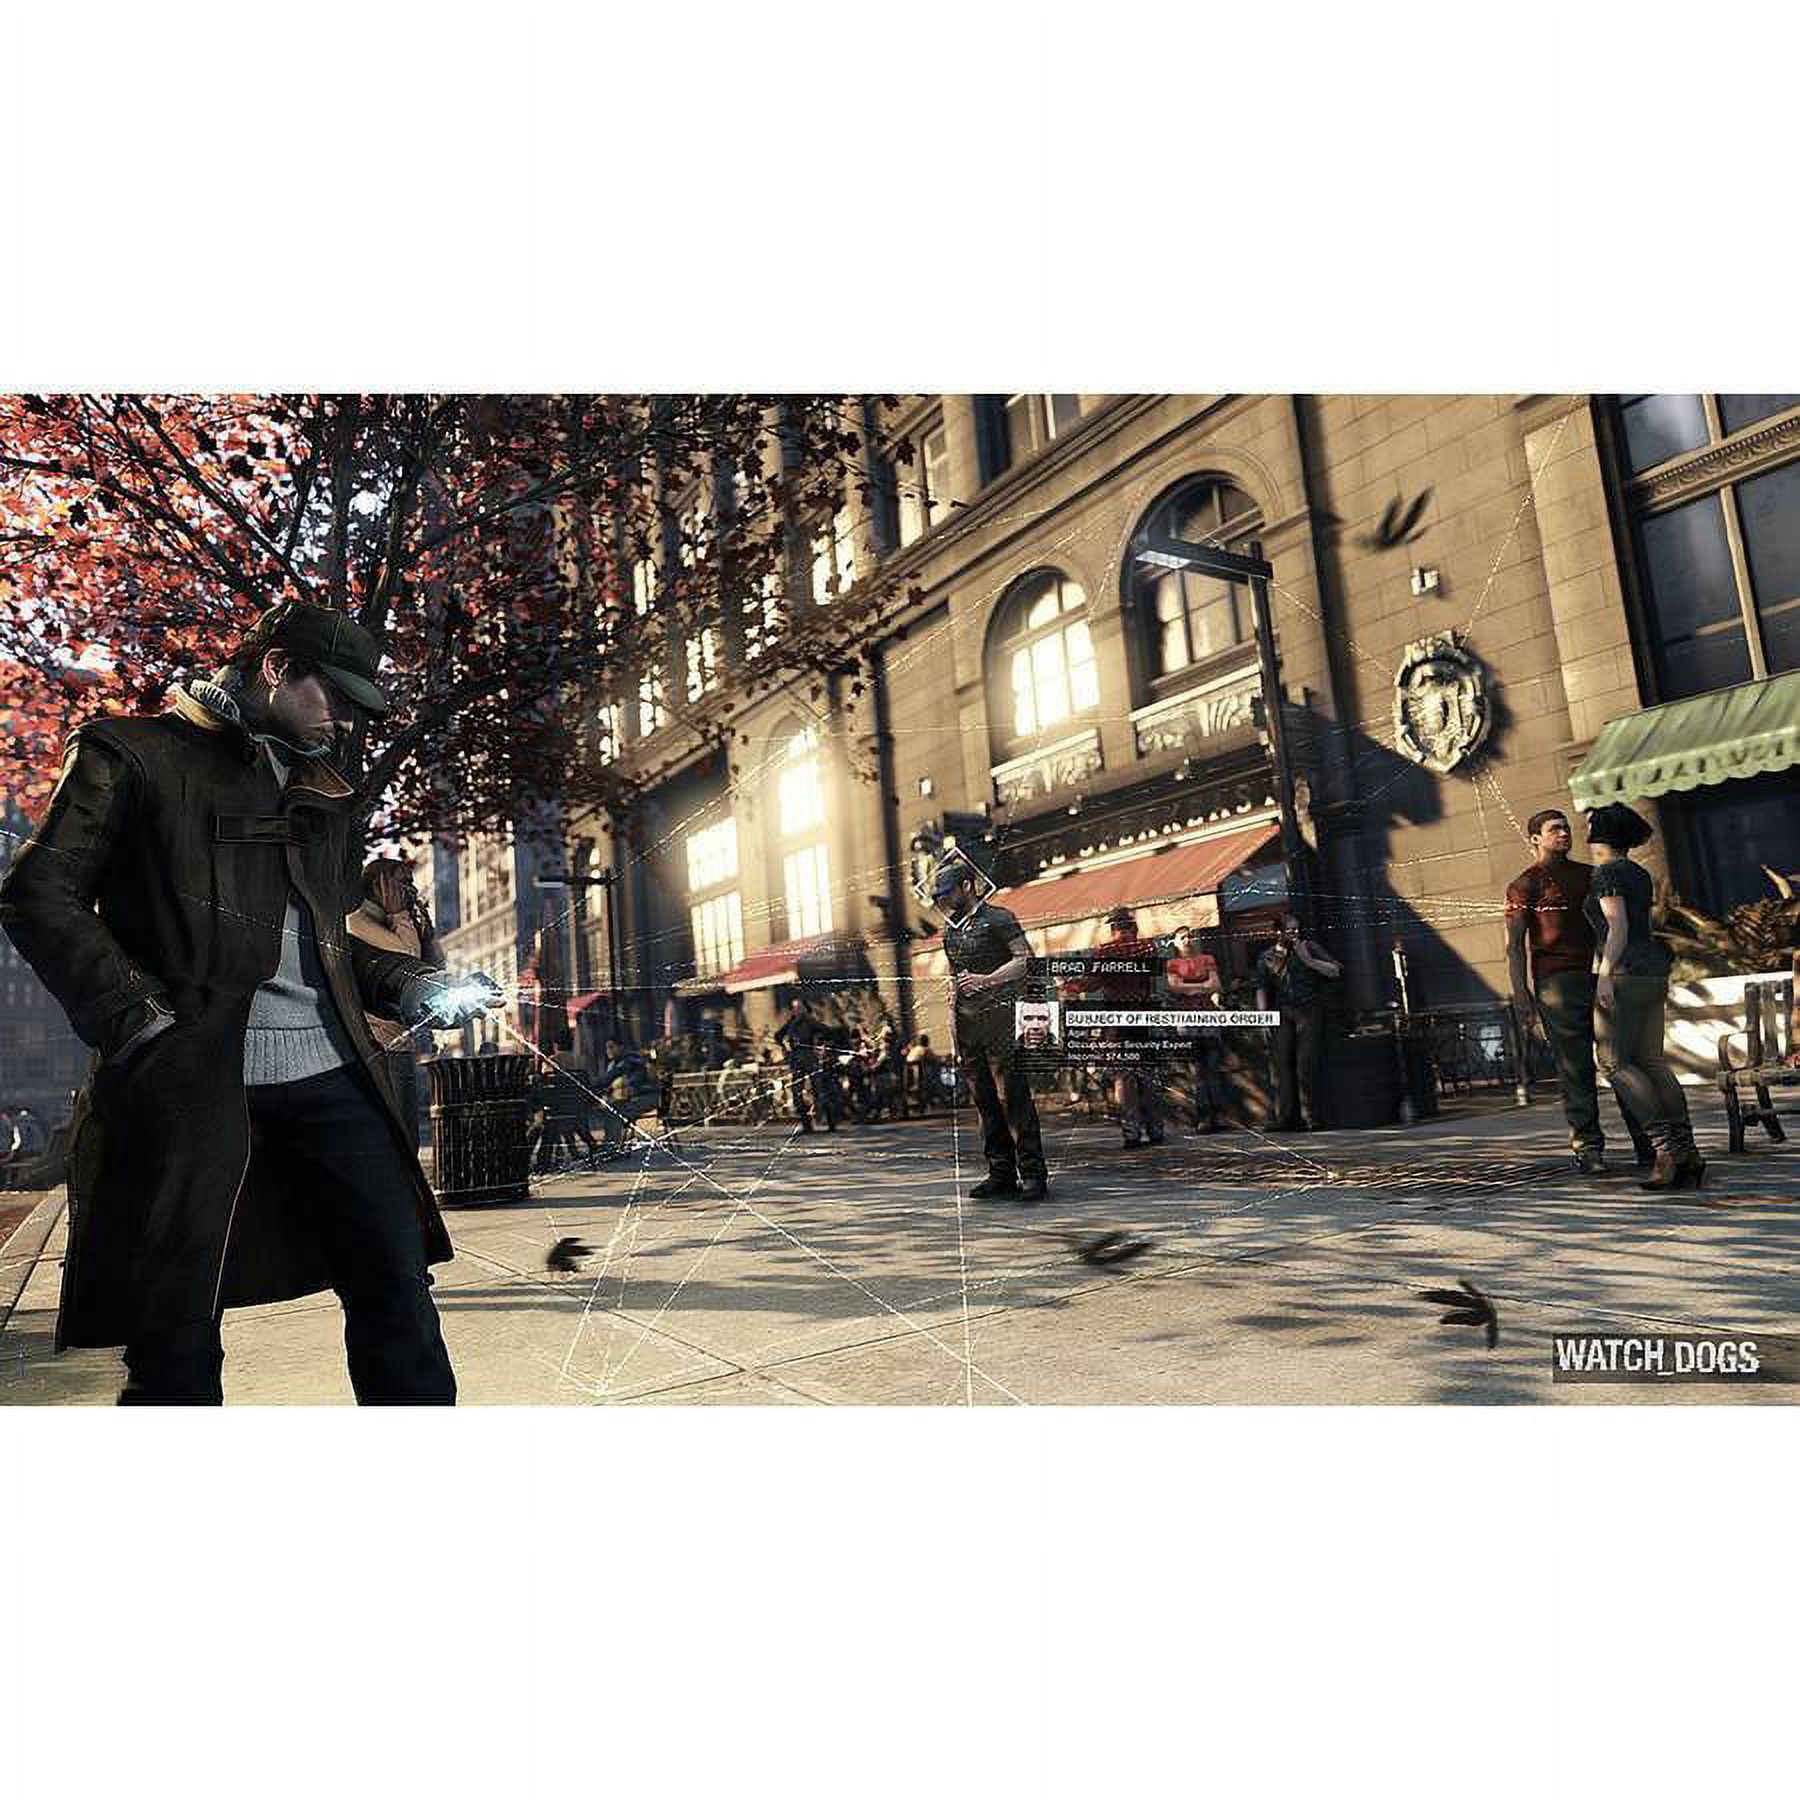 Watch Dogs - image 3 of 6